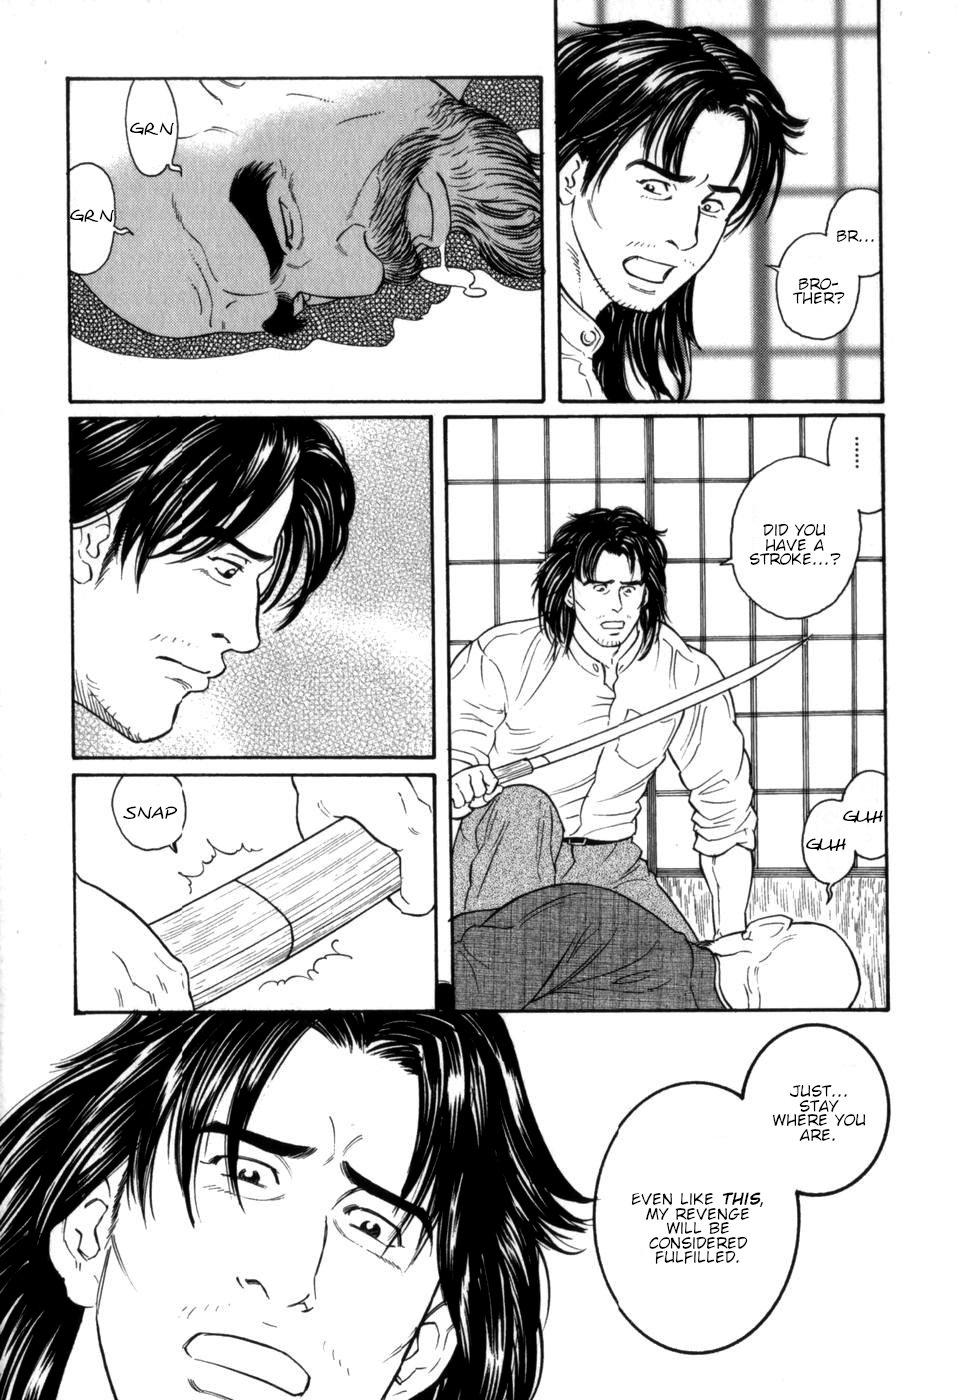 Camera Gedou no Ie Chuukan | House of Brutes Vol. 2 Ch. 7 Web Cam - Page 5